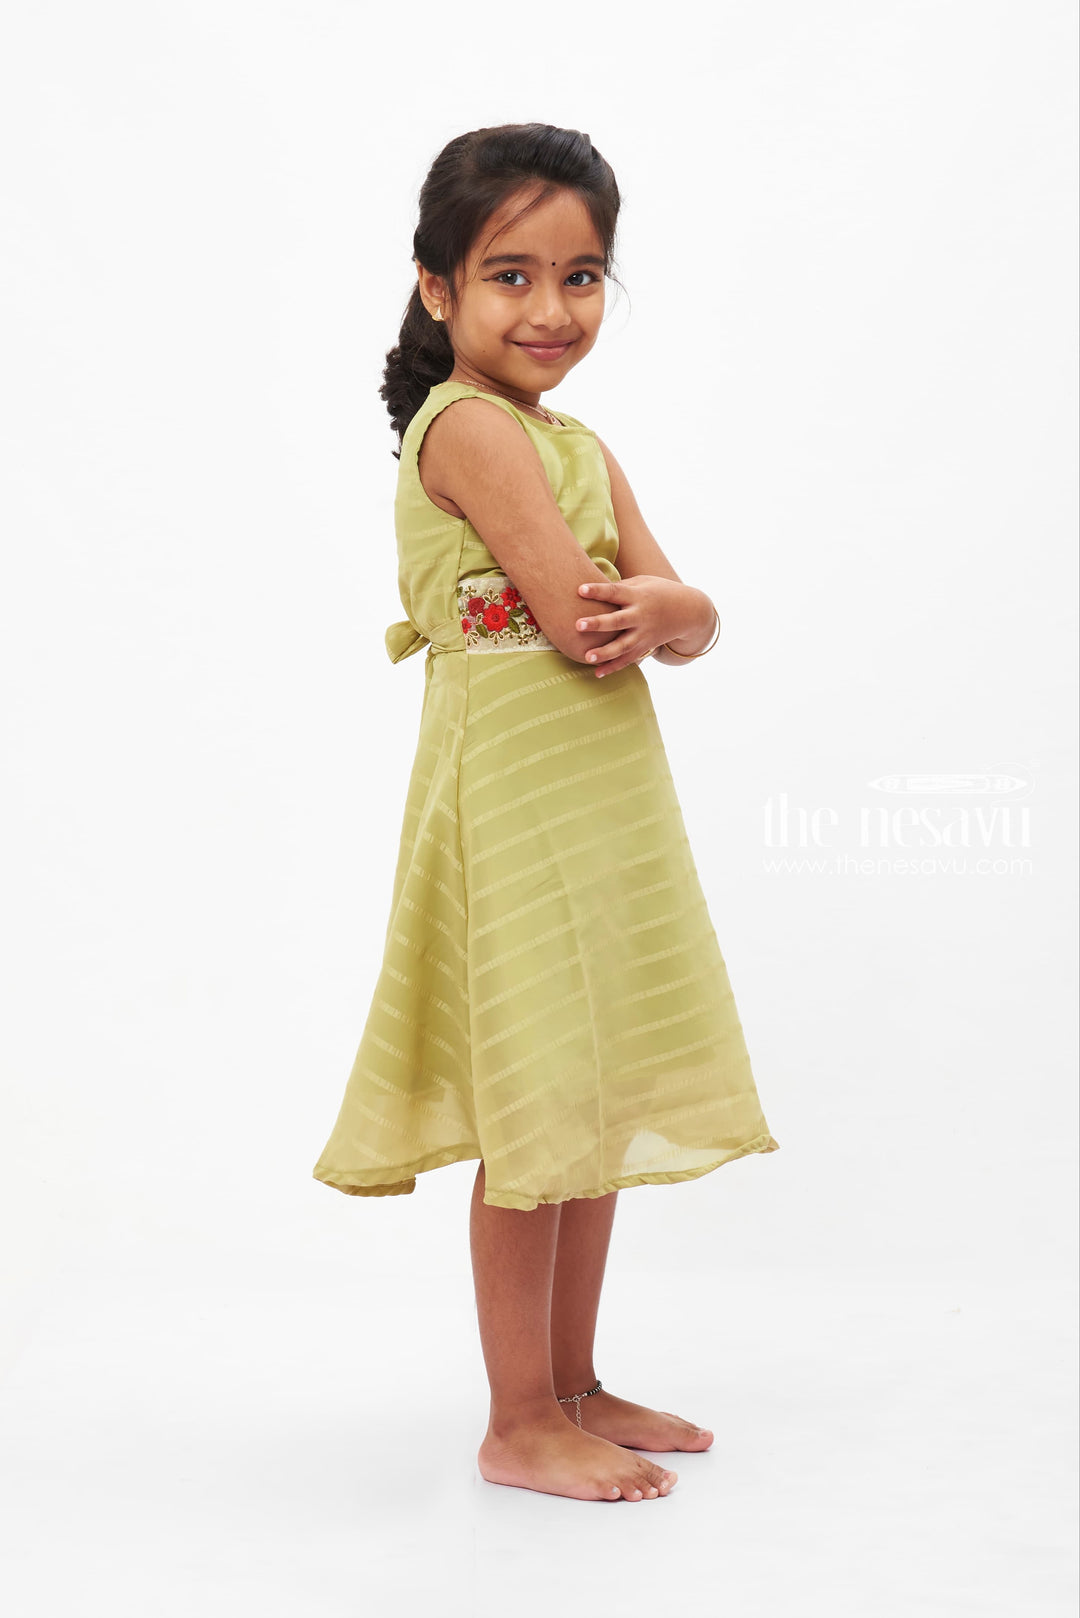 The Nesavu Girls Fancy Frock Green Striped with Embroidered Frock: Sleeveless Summer Charm for Girls Nesavu Sleeveless Striped Frock | Refreshing Daywear for Kids | The Nesavu